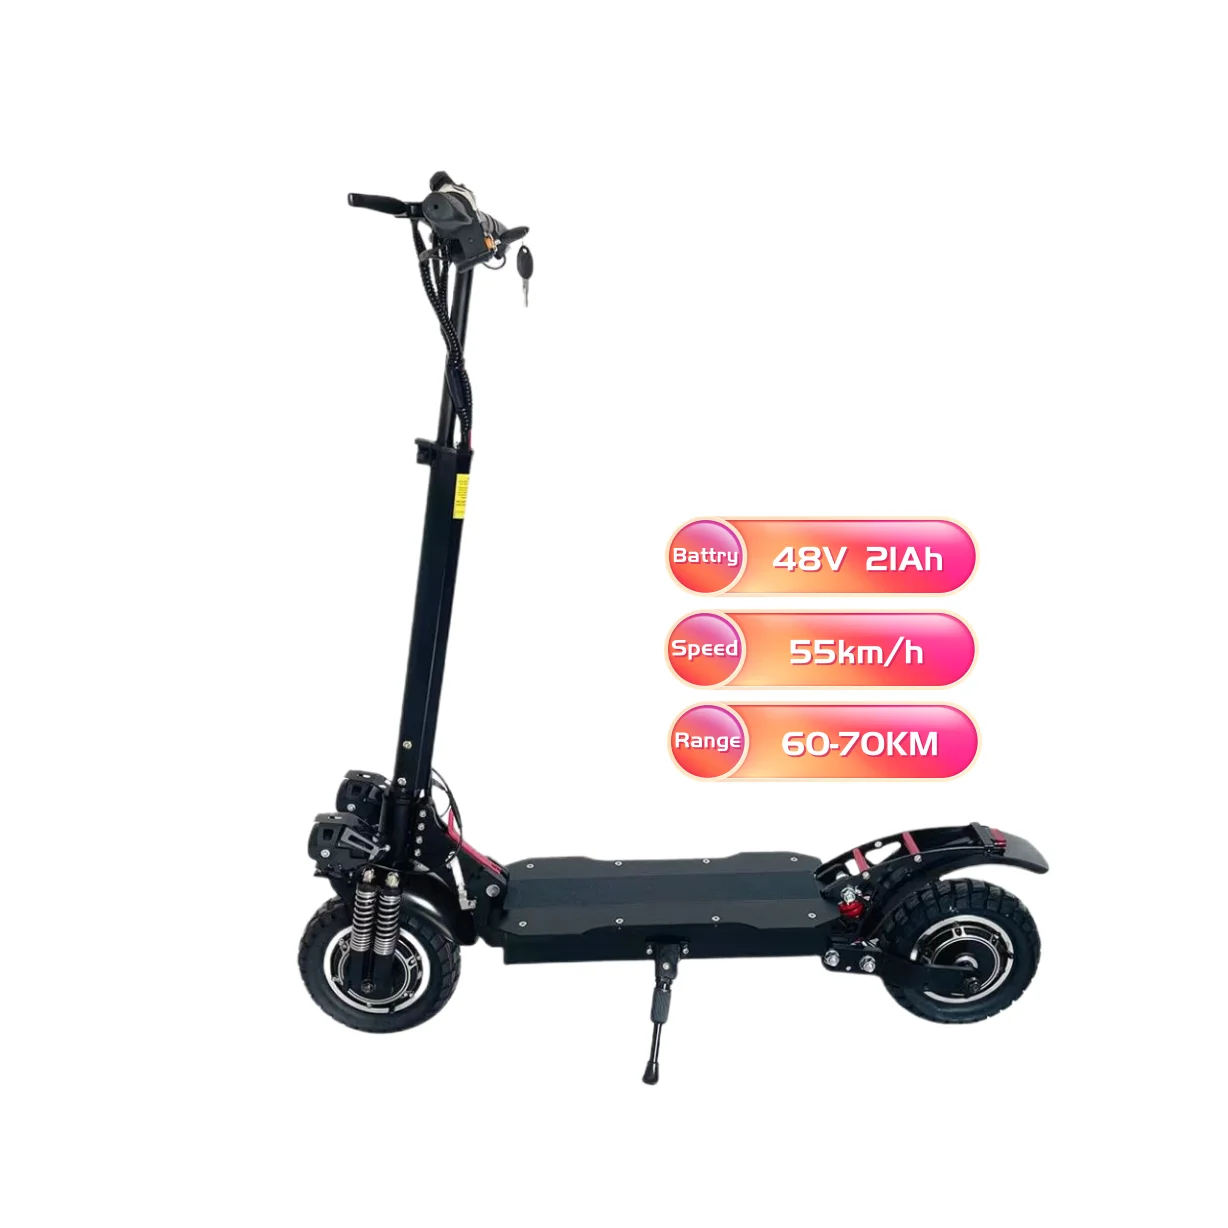 

Hot Sale Off road two wheels foldable 10incn 48V 21Ah 55km/h 60-70km 2400W Dual motor EU warehouse electric scooter for adult